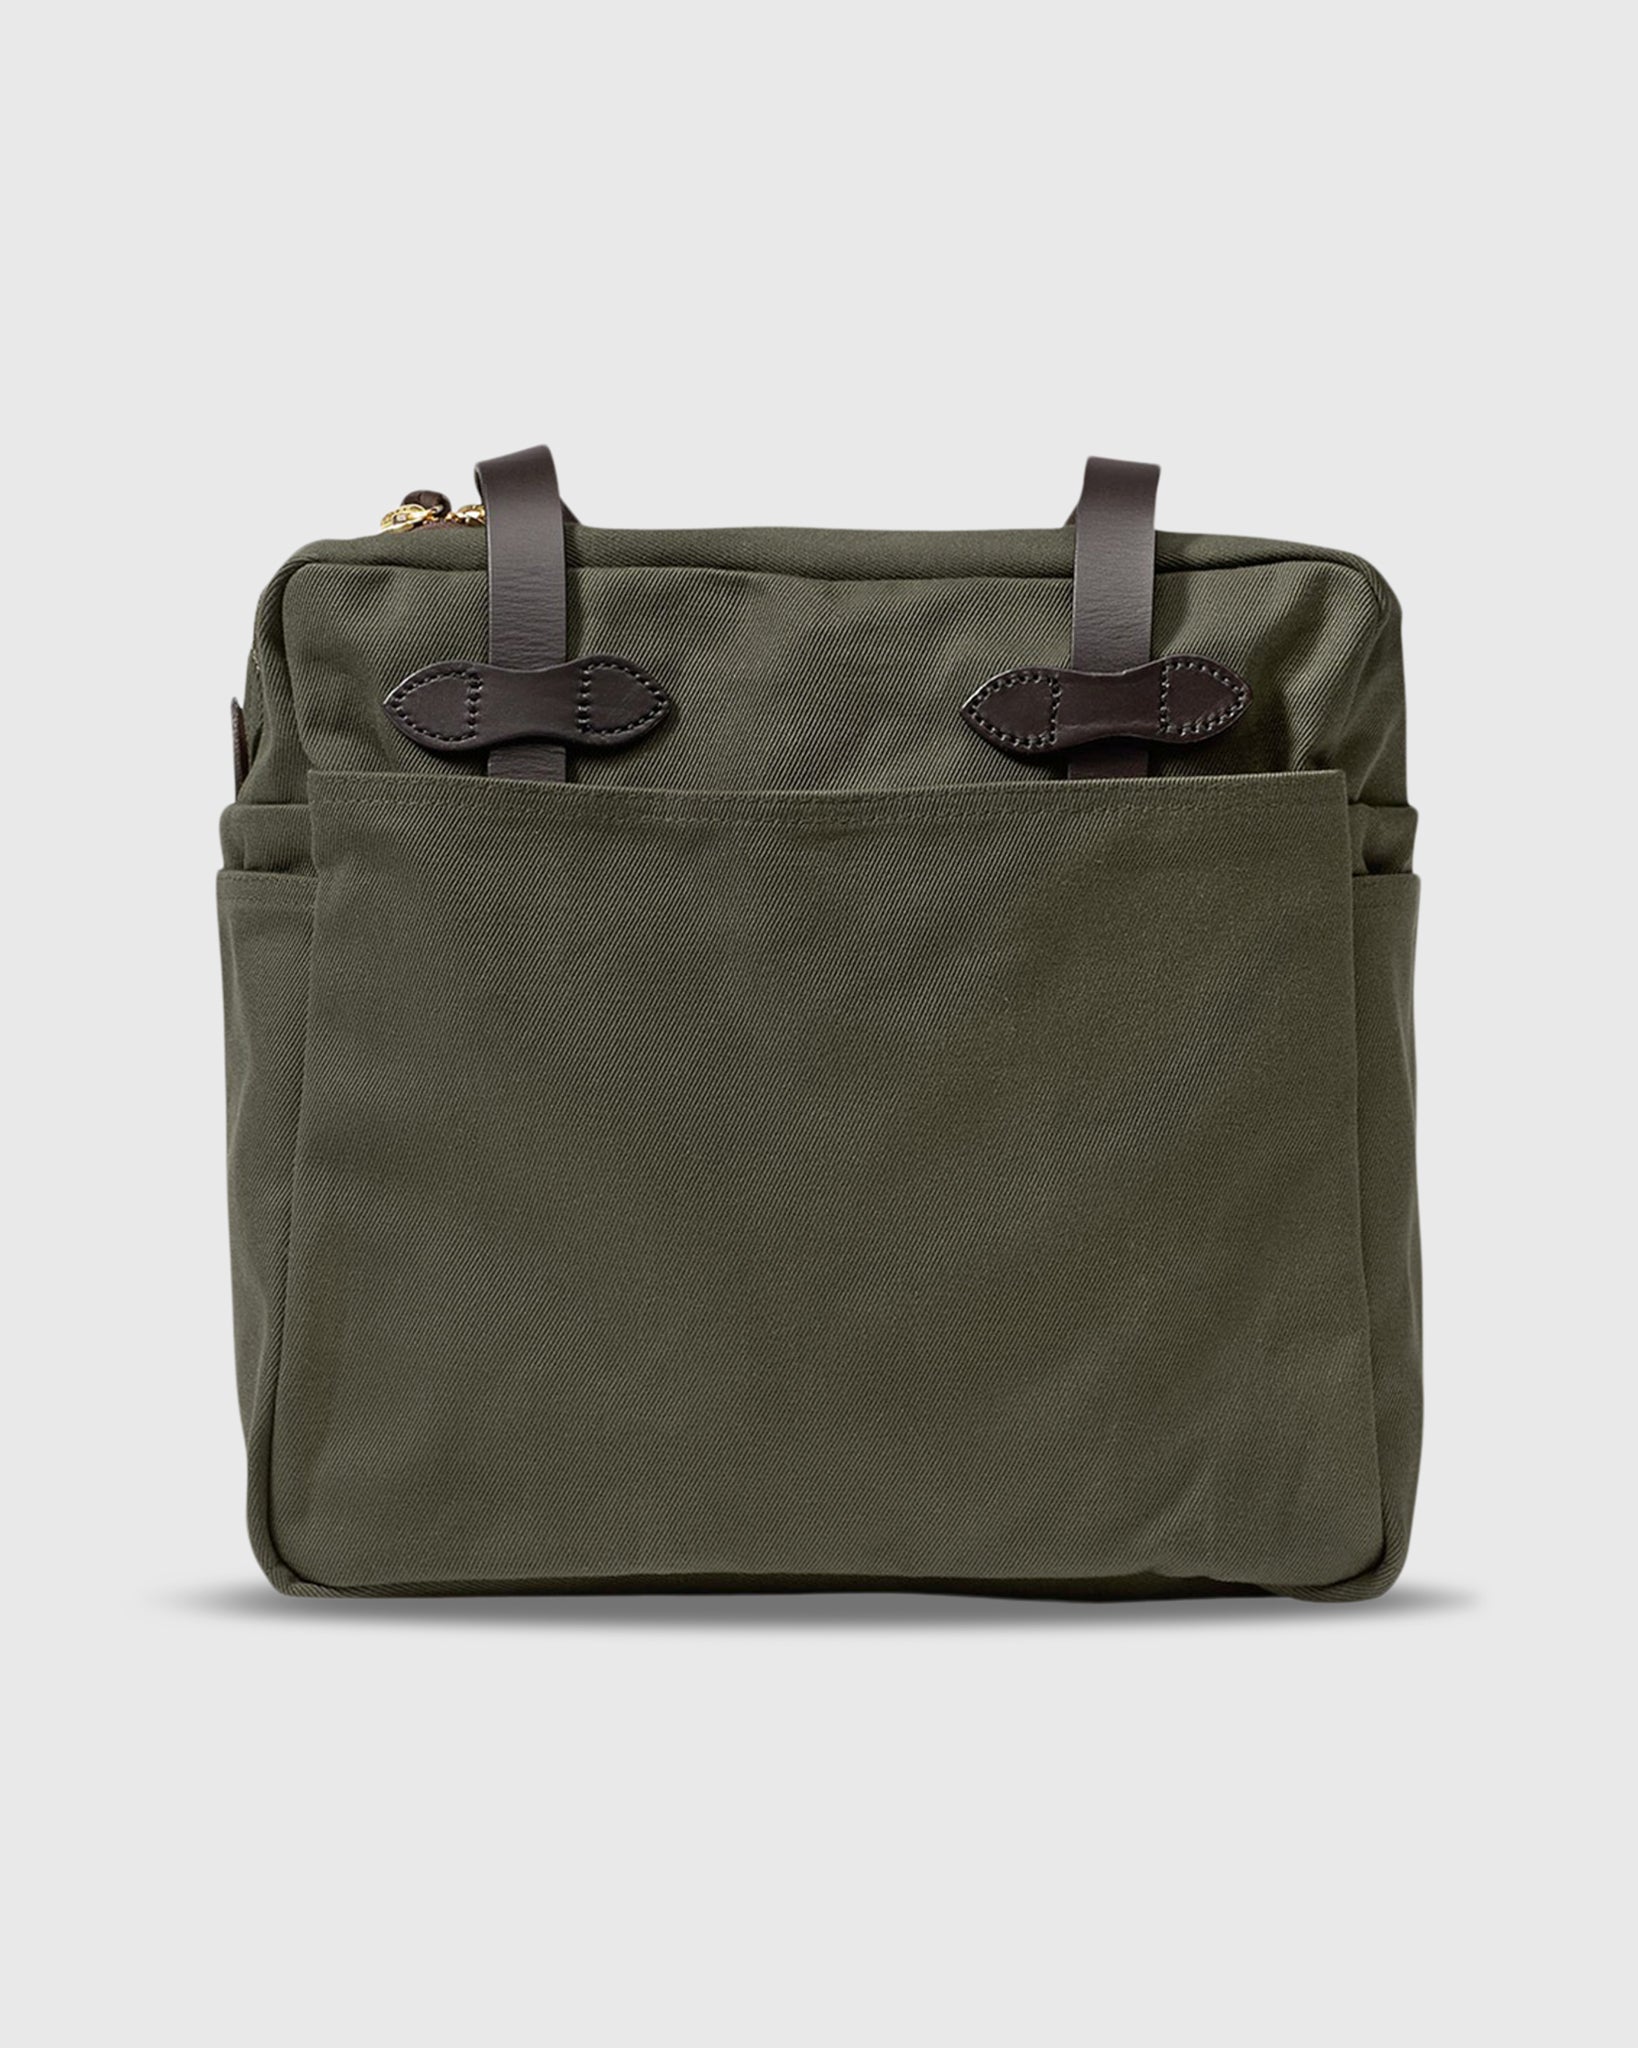 Filson Rugged Twill Tote Bag with Zipper